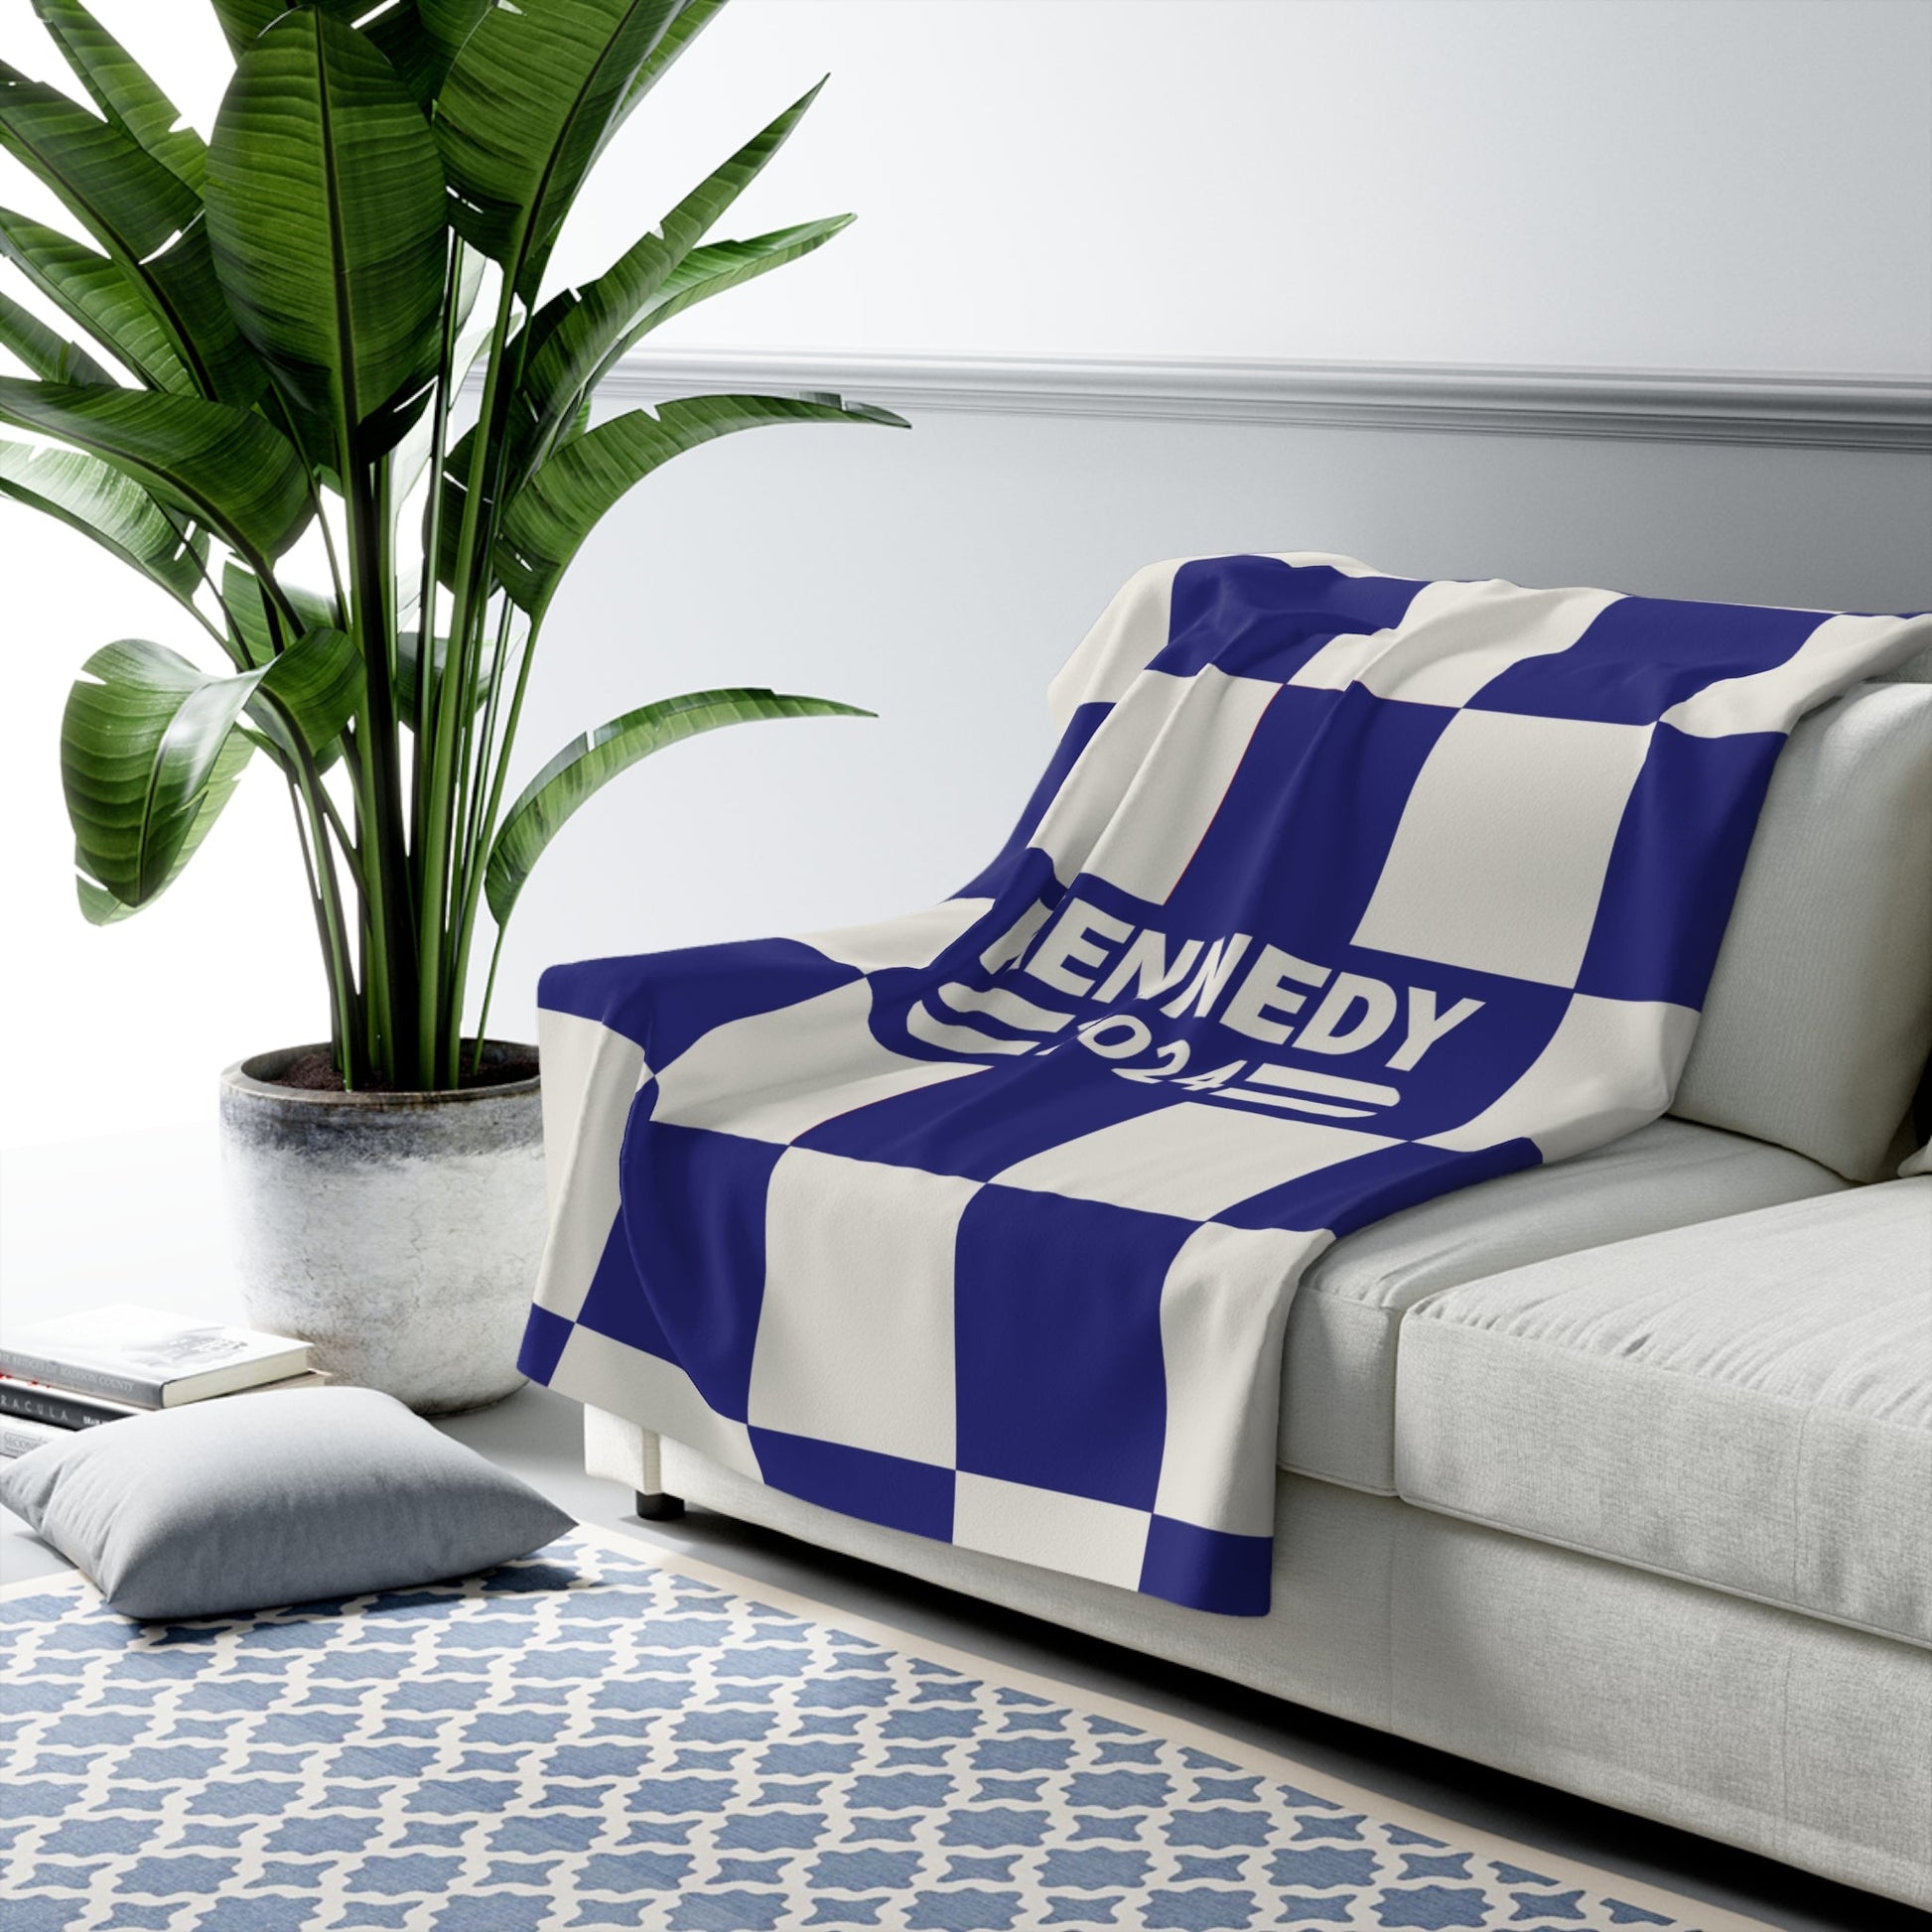 Kennedy Classic Navy Checkered Sherpa Fleece Blanket - TEAM KENNEDY. All rights reserved